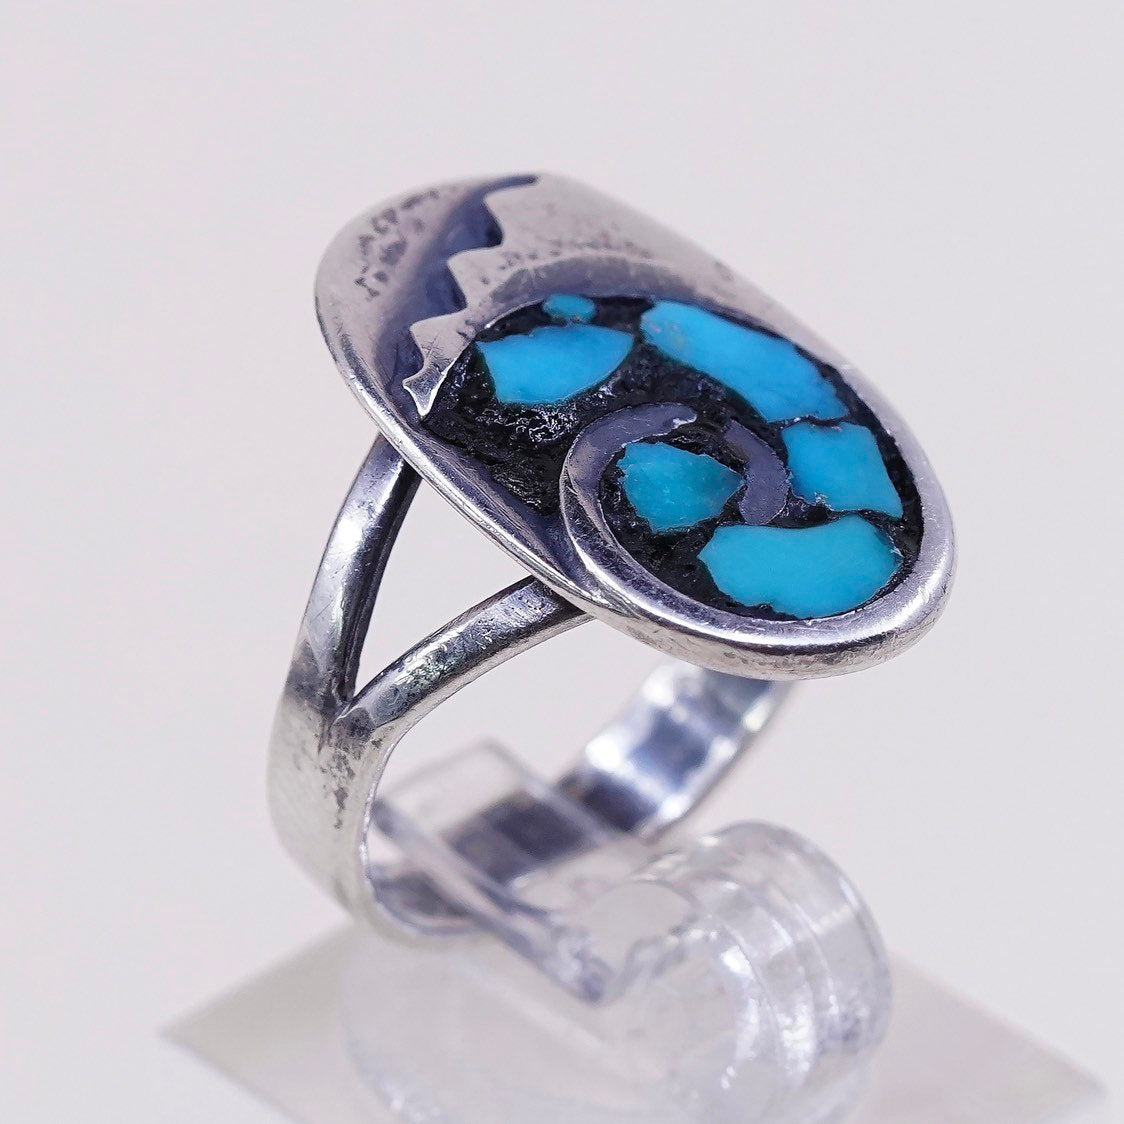 sz 6.75, sterling silver ring, Native American handmade 925 silver w/ turquoise